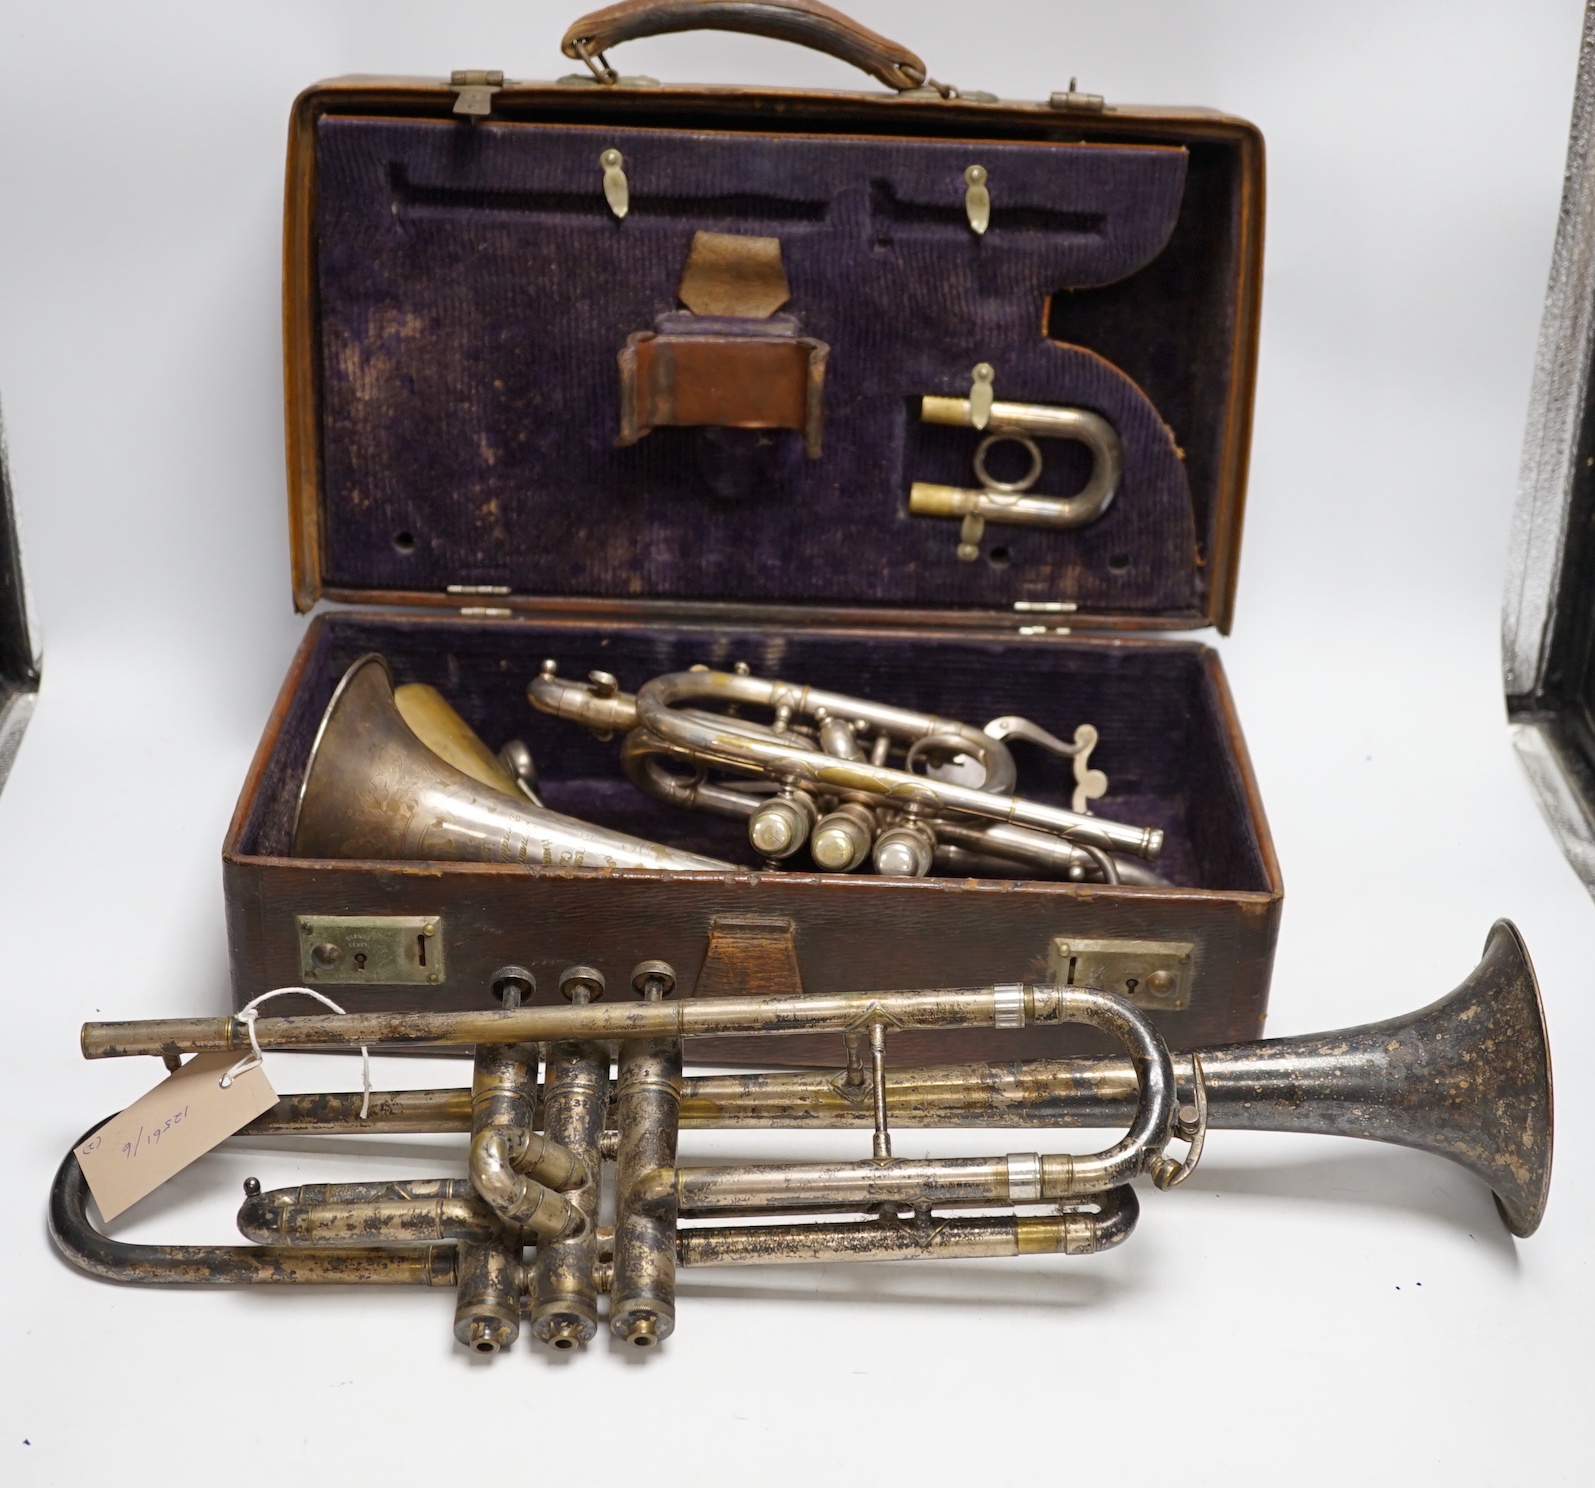 A cased Hawkes & Son cornet, bell engraved with ‘Excelsior Soncrous Class A’ and an ‘American Standard High Grade’ trumpet, with a brass mute and three mouthpieces